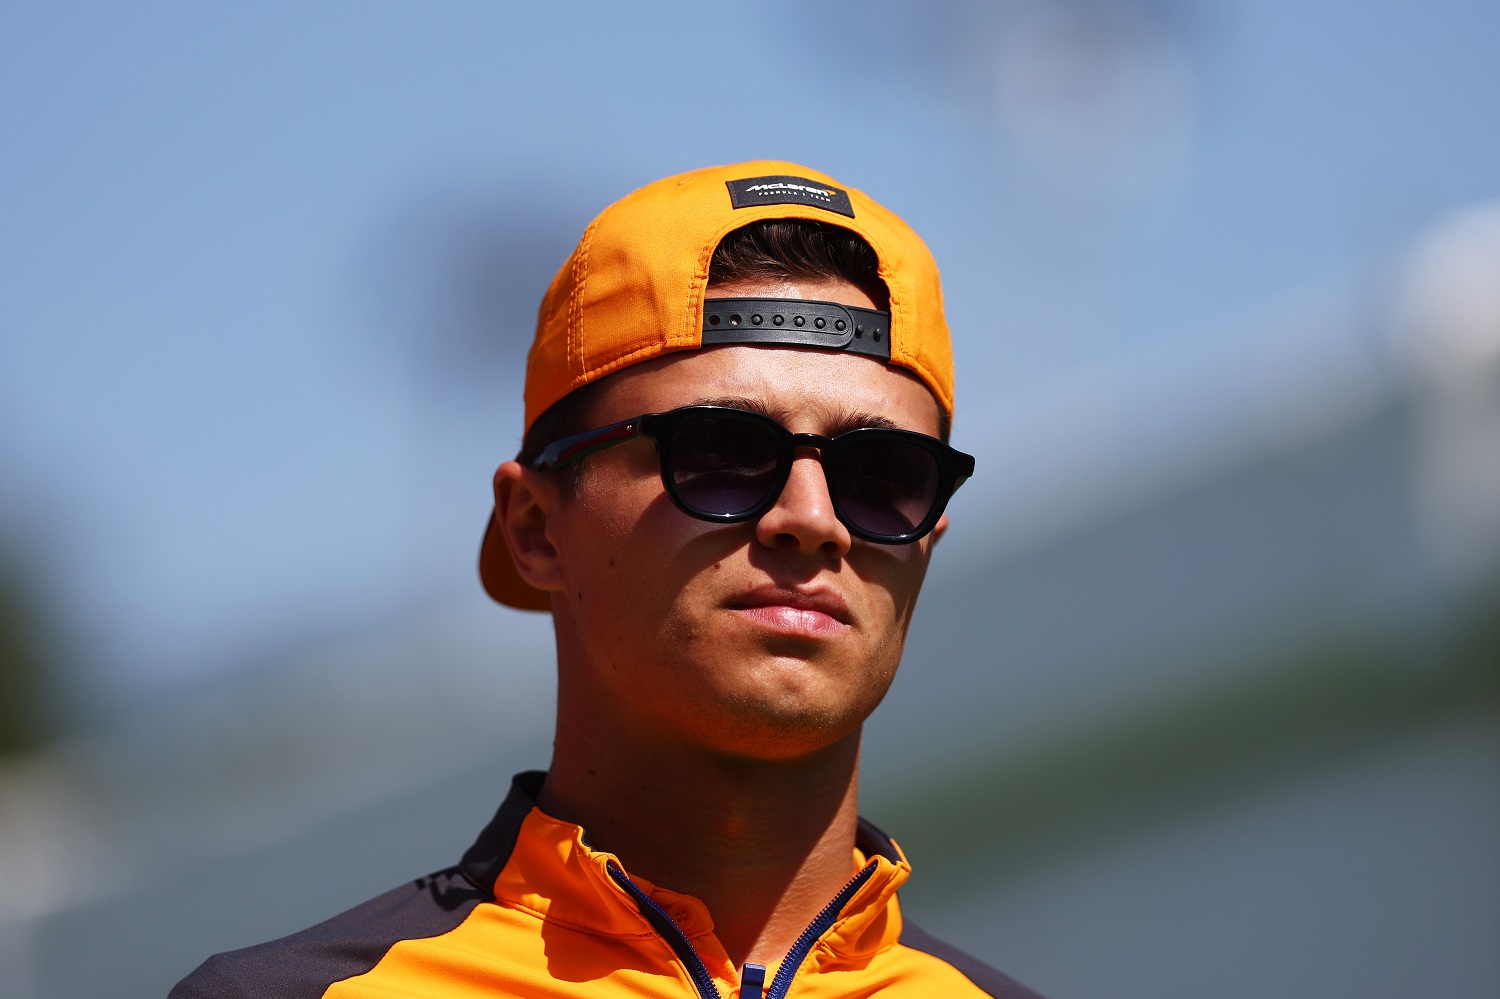 Why Did Lando Norris Join Max Verstappen and Lewis Hamilton by Moving